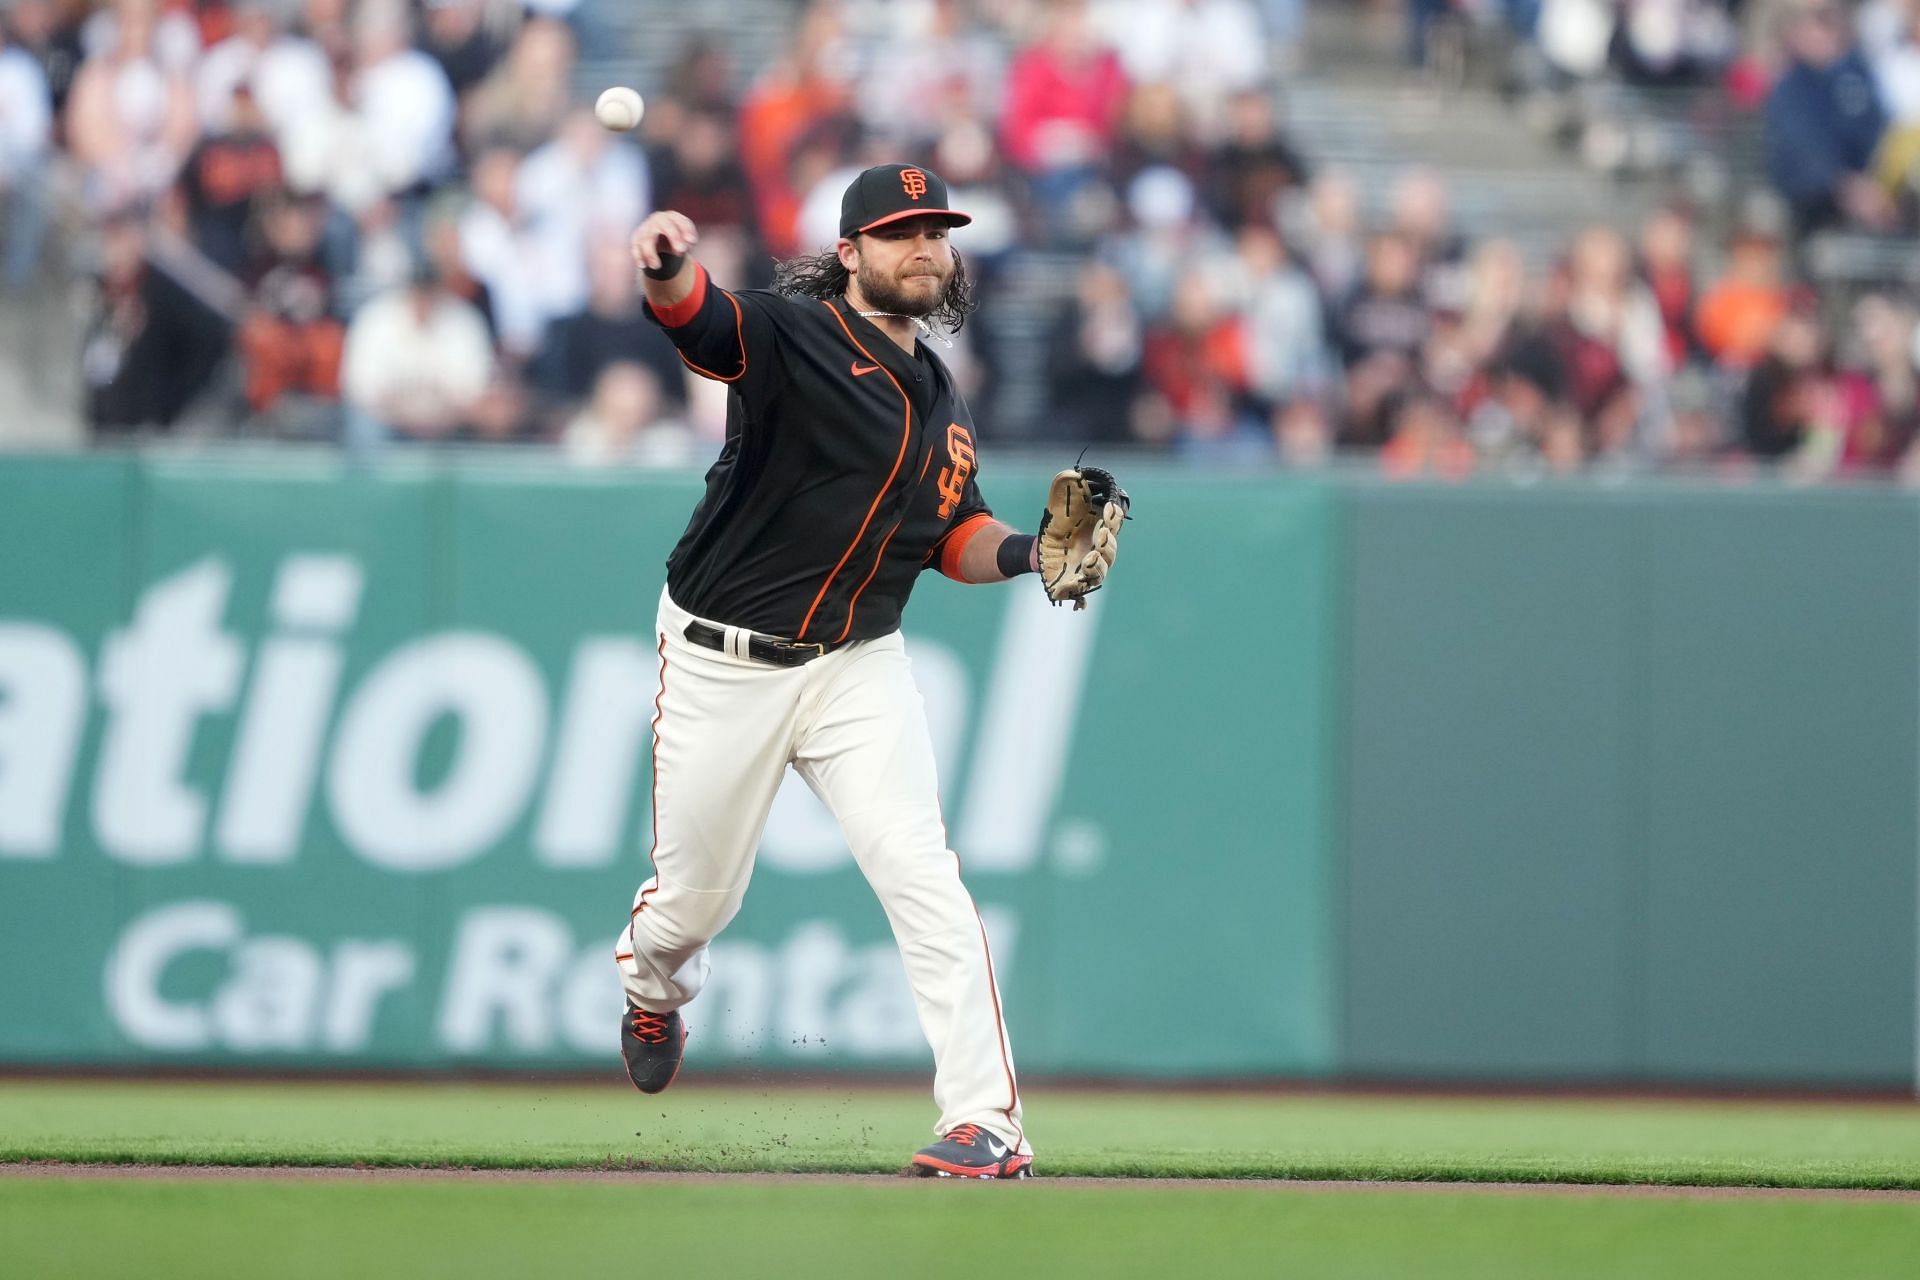 Brandon Crawford plays on amid family grief